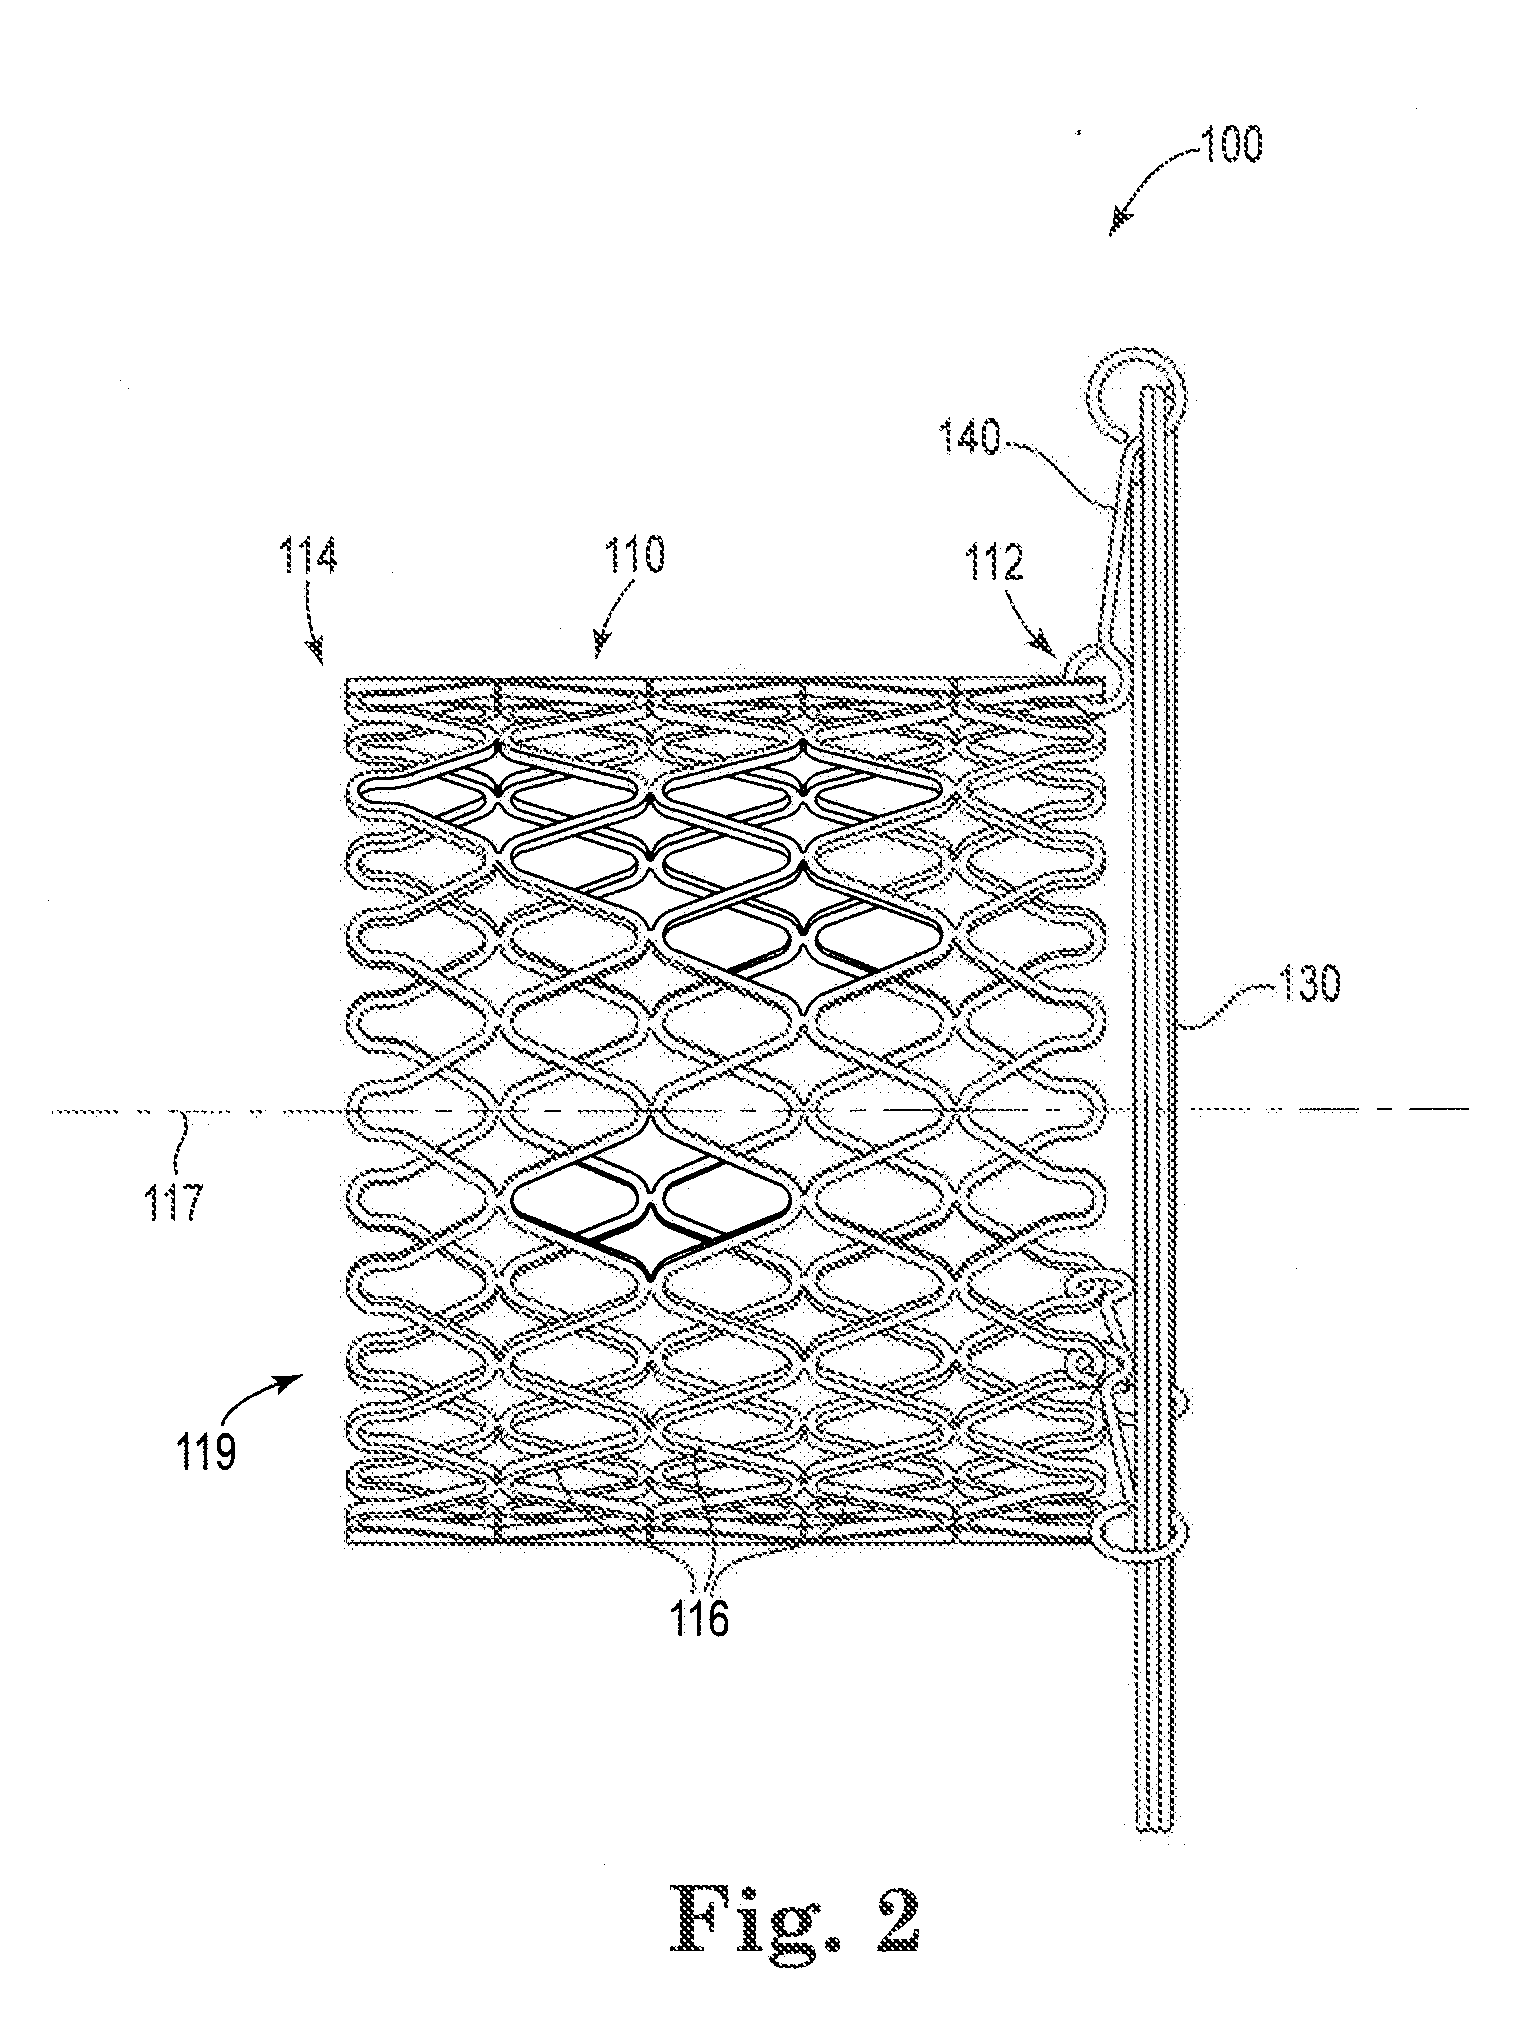 Transcatheter Valve with Torsion Spring Fixation and Related Systems and Methods